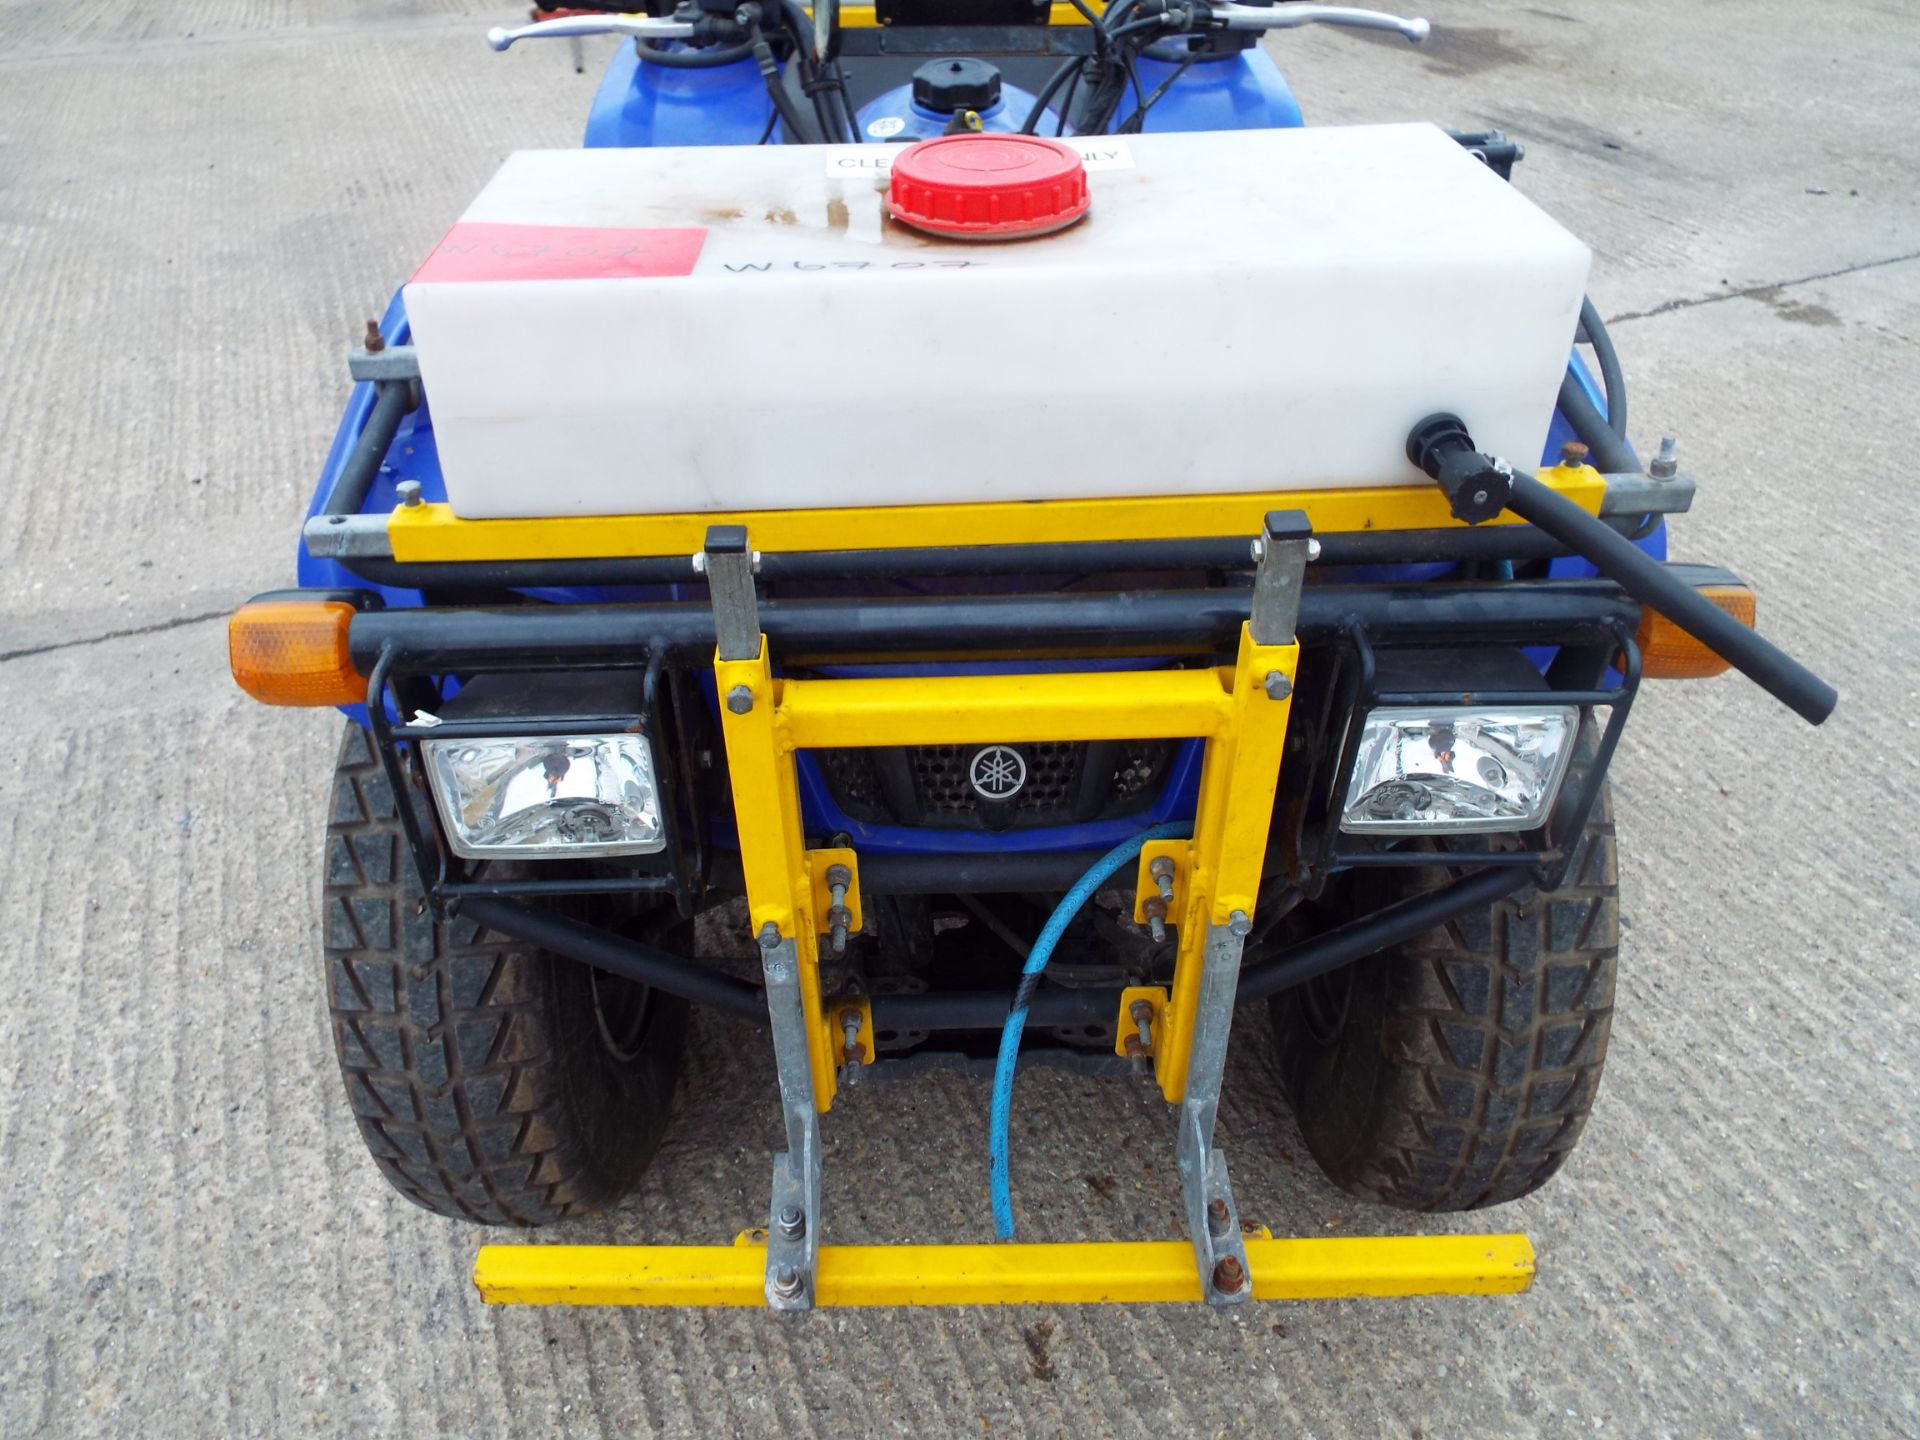 2008 Yamaha Grizzly 350 Ultramatic Quad Bike fitted with Vale Front/Rear Spraying Equipment - Image 16 of 26